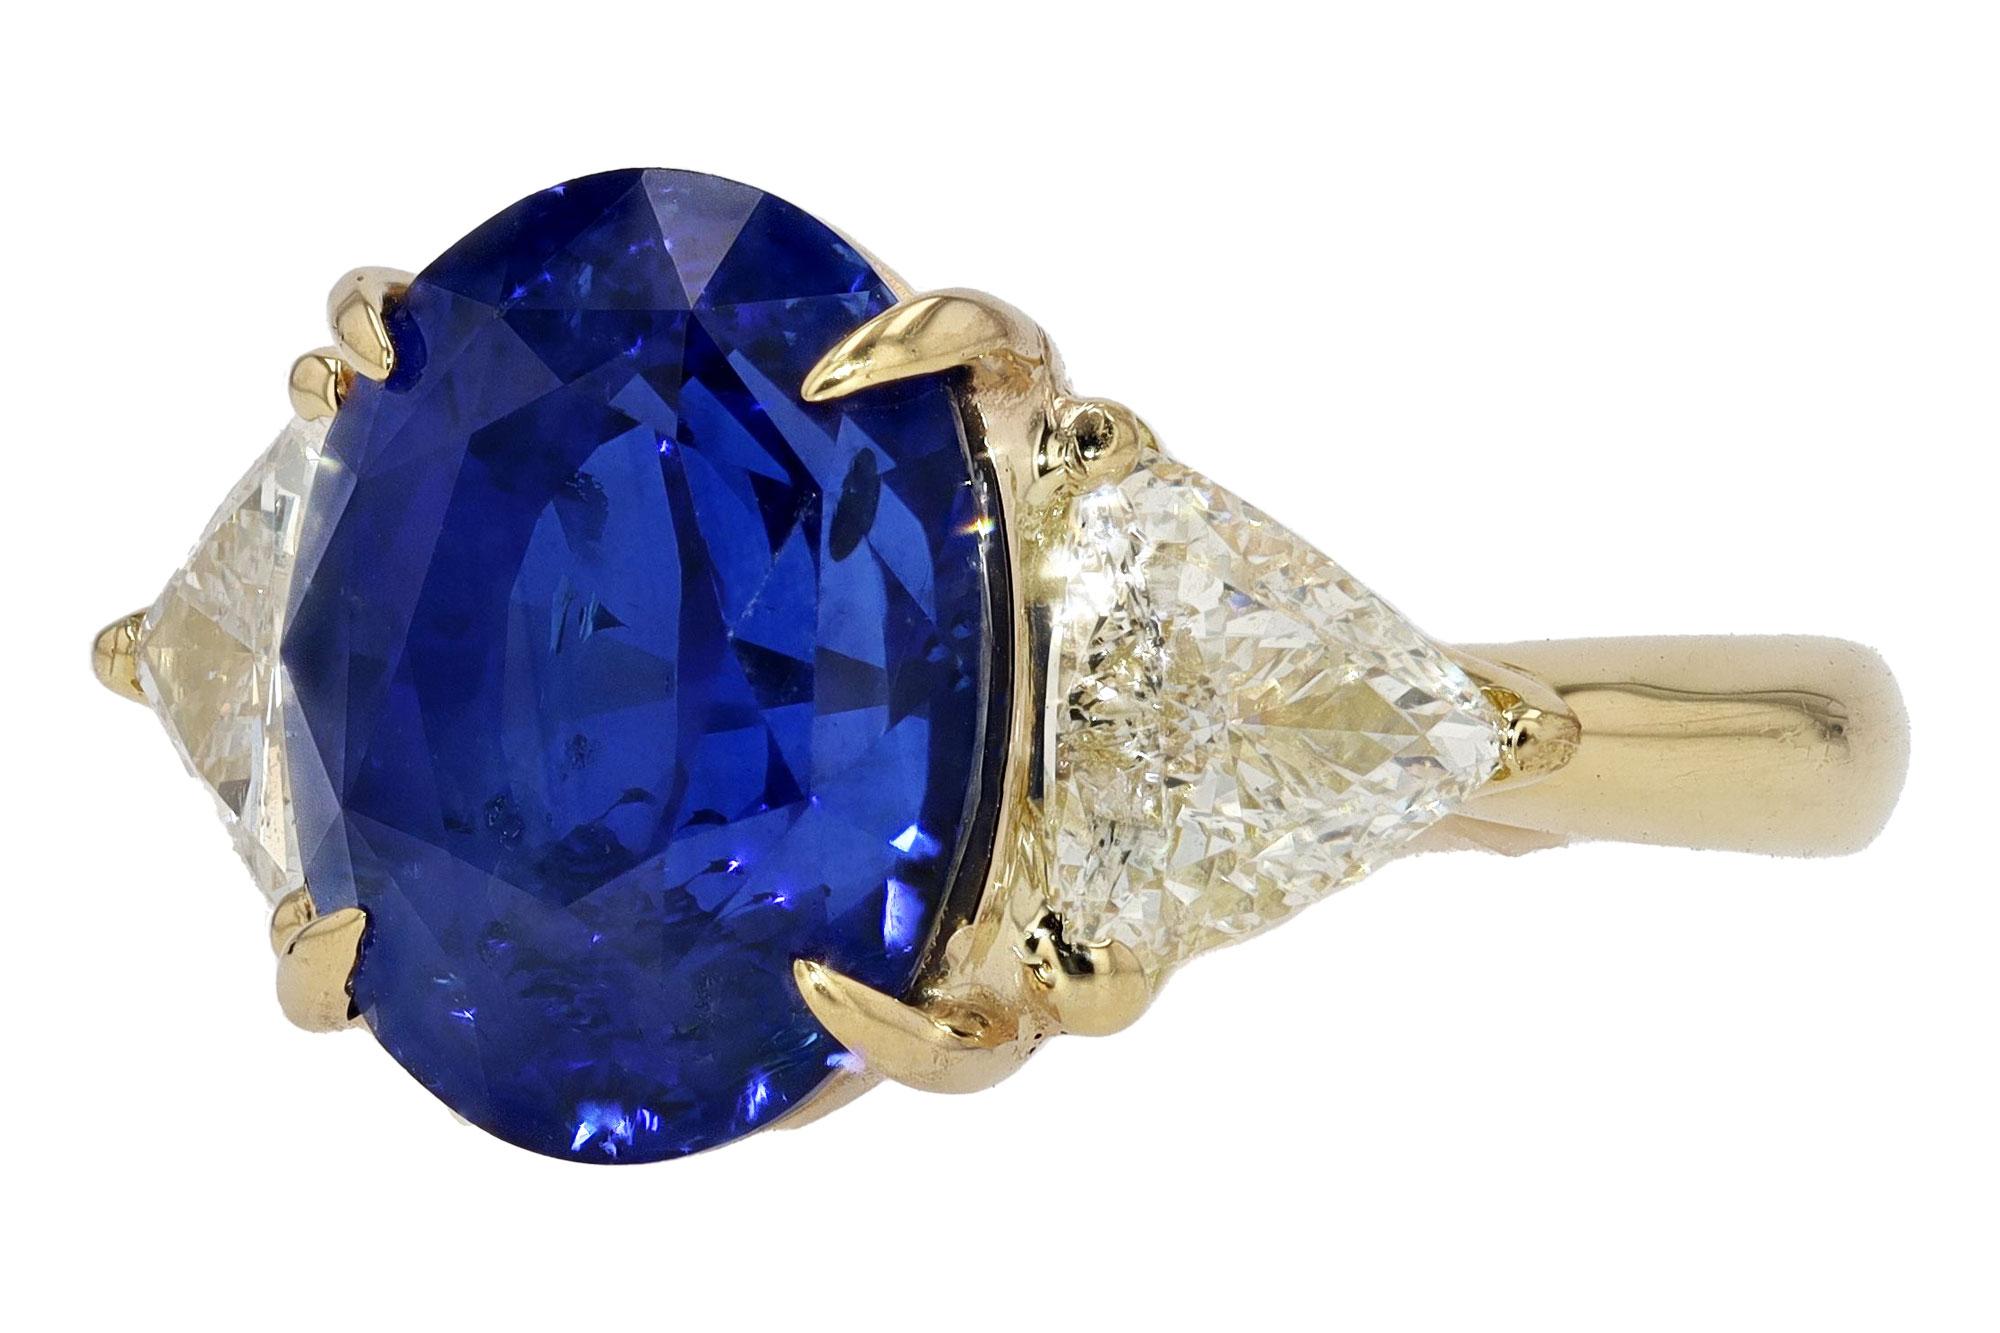 A classic 3 stone sapphire engagement ring centered by a rich, royal blue Ceylon sapphire. A gem of notable pedigree along with a Gemological Institute of America {GIA} report stating both identity and origin. What makes this gemstone engagement